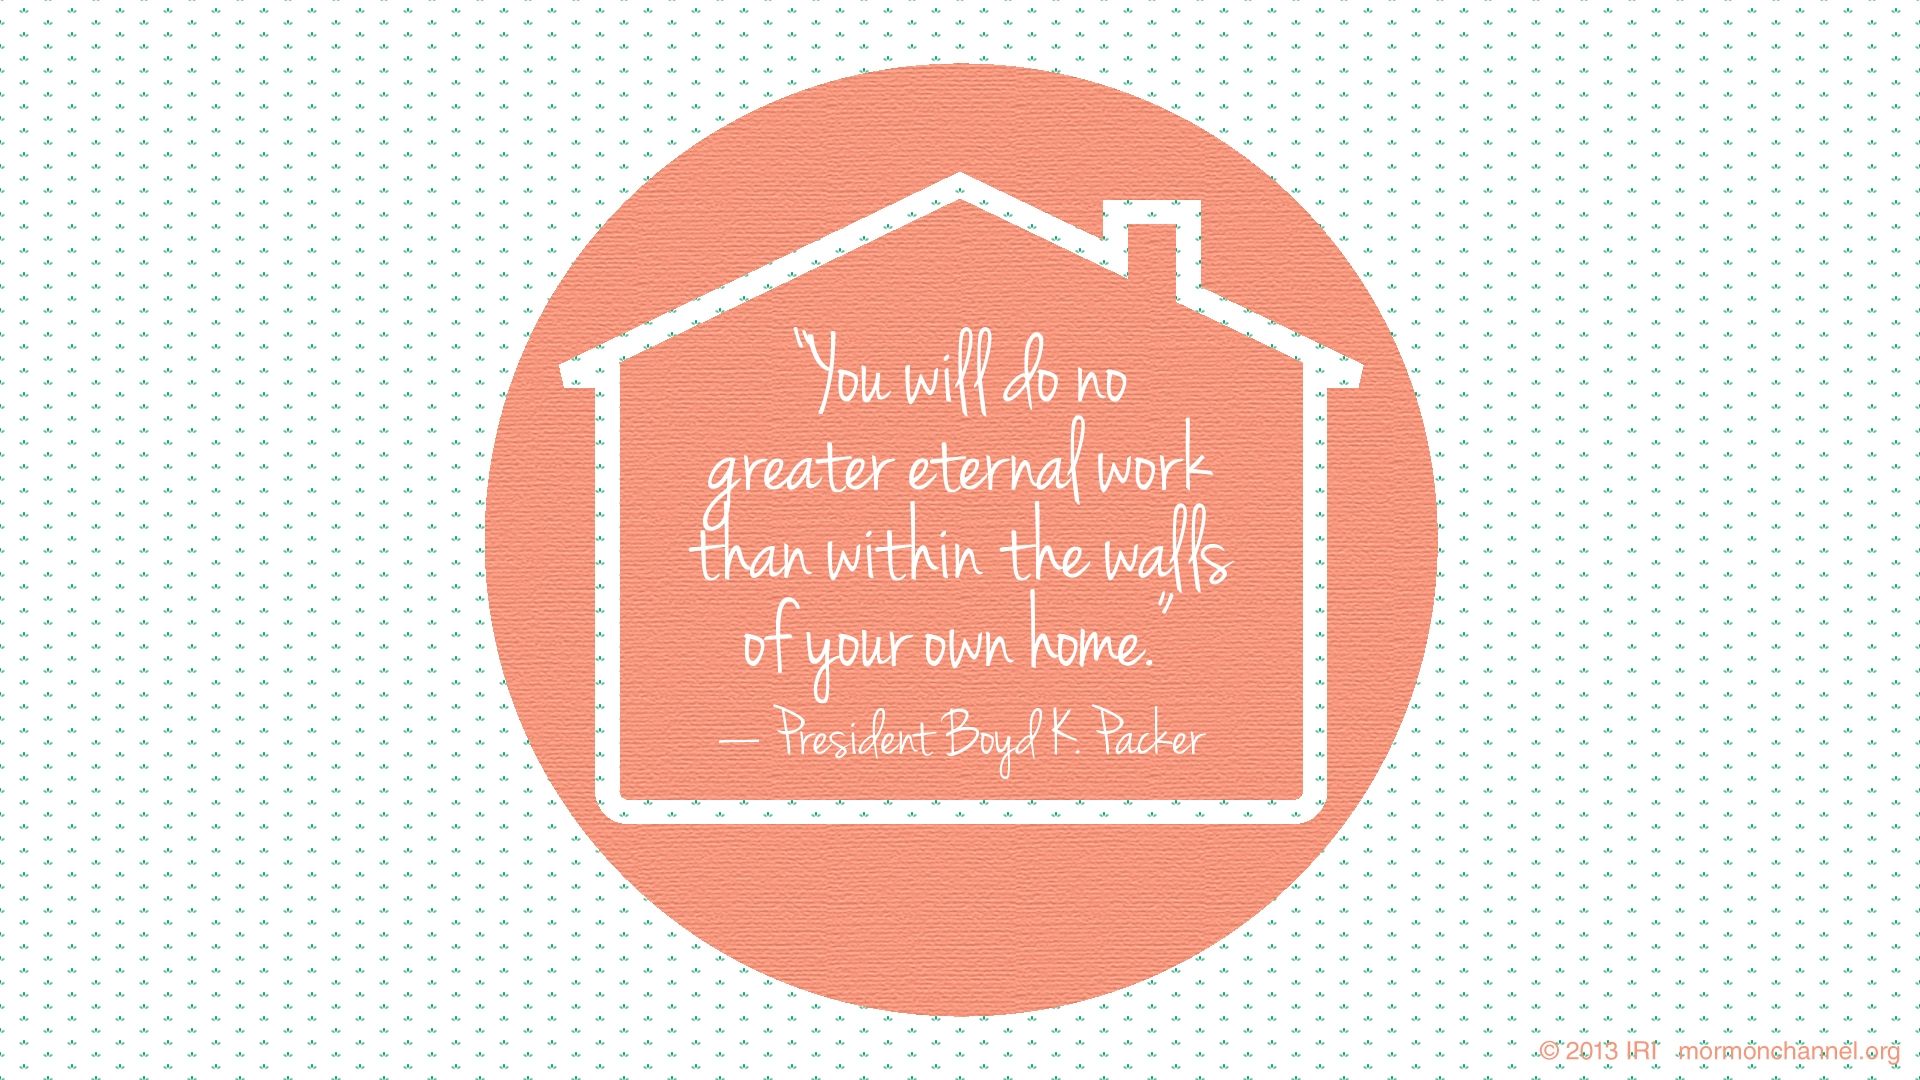 “You will do no greater eternal work than within the walls of your own home.”—President Boyd K. Packer, “These Things I Know”